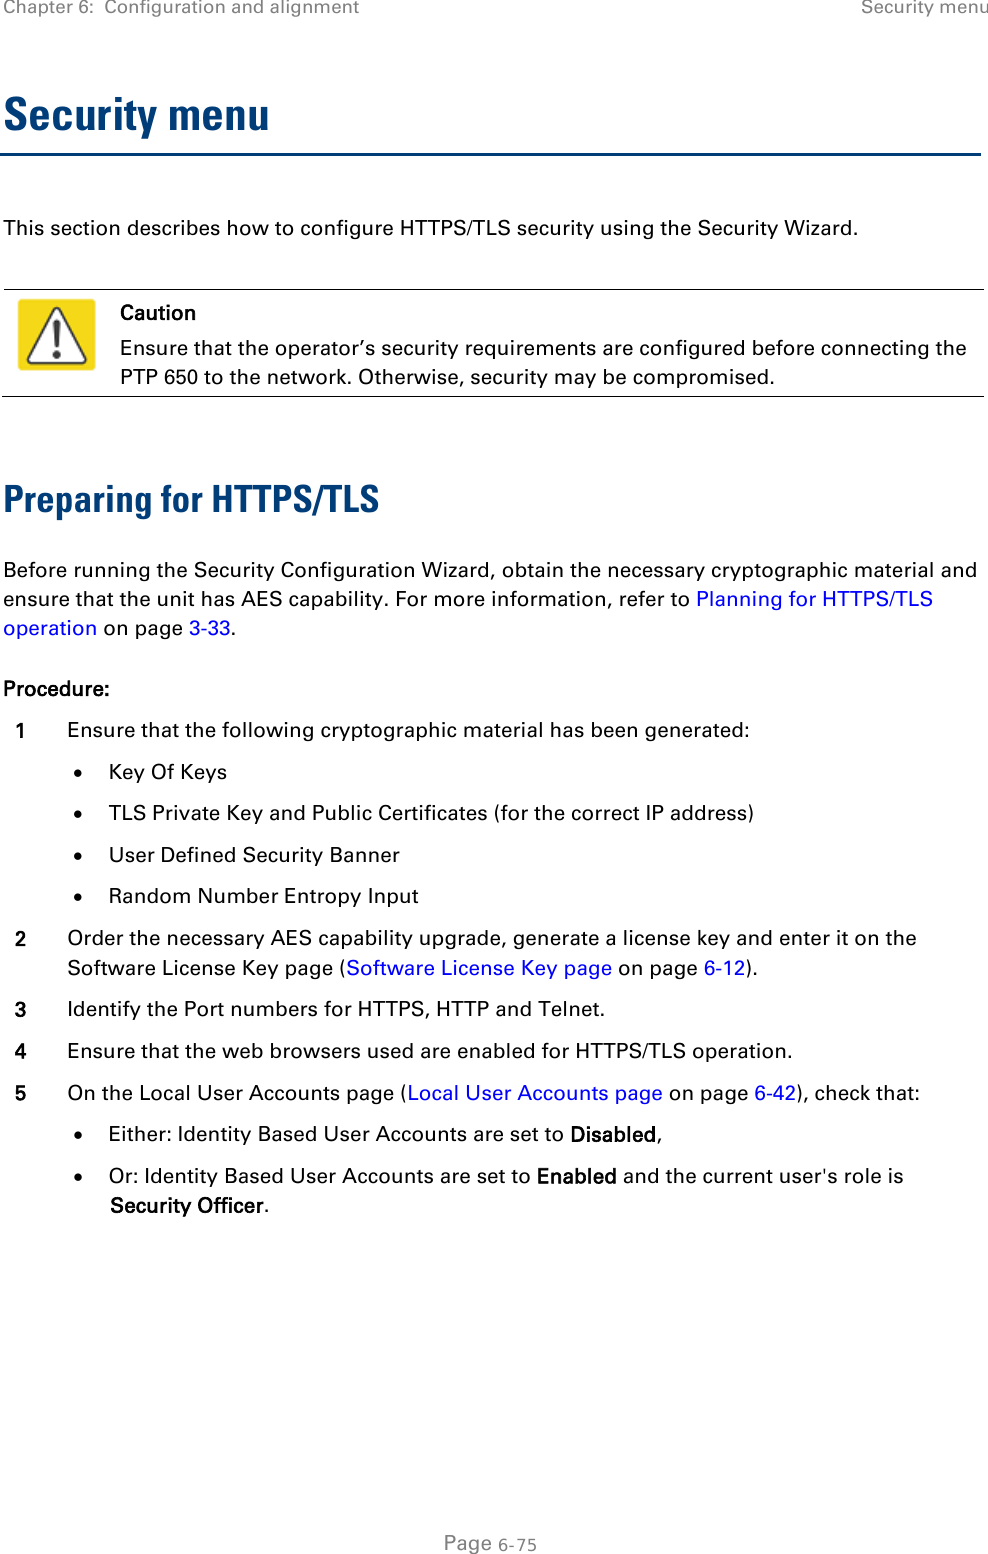 Chapter 6:  Configuration and alignment Security menu  Security menu This section describes how to configure HTTPS/TLS security using the Security Wizard.   Caution Ensure that the operator’s security requirements are configured before connecting the PTP 650 to the network. Otherwise, security may be compromised.  Preparing for HTTPS/TLS Before running the Security Configuration Wizard, obtain the necessary cryptographic material and ensure that the unit has AES capability. For more information, refer to Planning for HTTPS/TLS operation on page 3-33. Procedure: 1 Ensure that the following cryptographic material has been generated: • Key Of Keys • TLS Private Key and Public Certificates (for the correct IP address) • User Defined Security Banner • Random Number Entropy Input 2 Order the necessary AES capability upgrade, generate a license key and enter it on the Software License Key page (Software License Key page on page 6-12). 3 Identify the Port numbers for HTTPS, HTTP and Telnet. 4 Ensure that the web browsers used are enabled for HTTPS/TLS operation. 5 On the Local User Accounts page (Local User Accounts page on page 6-42), check that: • Either: Identity Based User Accounts are set to Disabled, • Or: Identity Based User Accounts are set to Enabled and the current user&apos;s role is Security Officer.   Page 6-75 